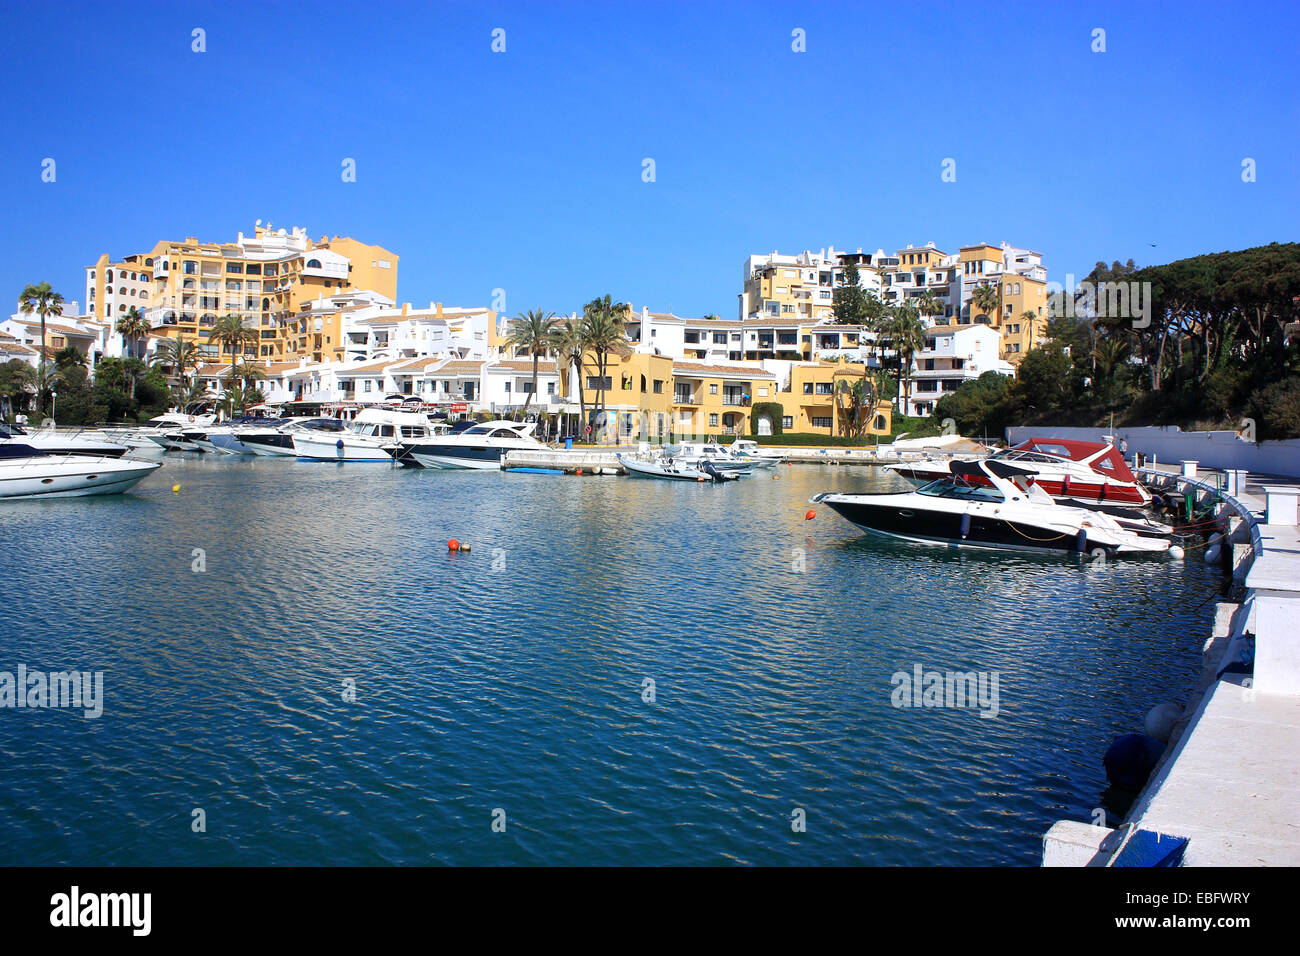 A view of the Harbour at Cabopino holiday resort on the Costa Del Sol Stock Photo